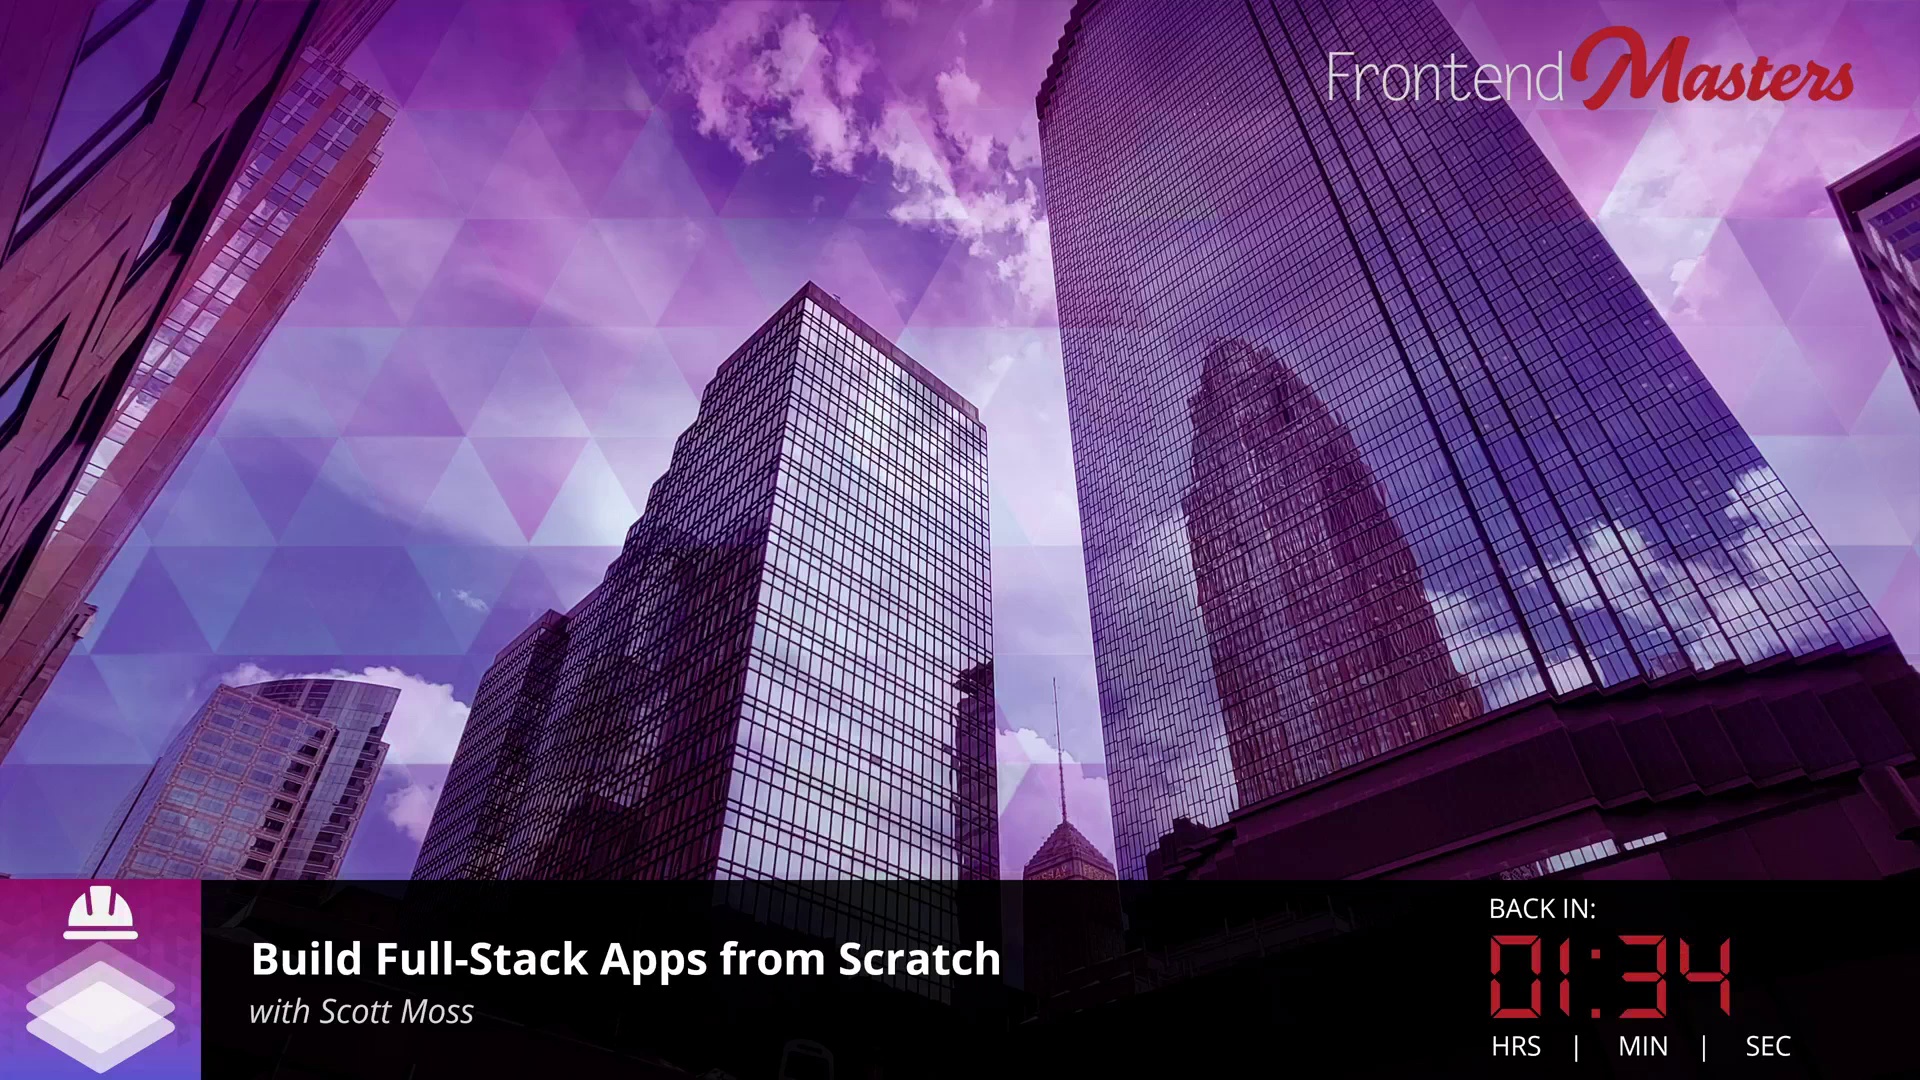 Build Full-Stack Apps from Scratch